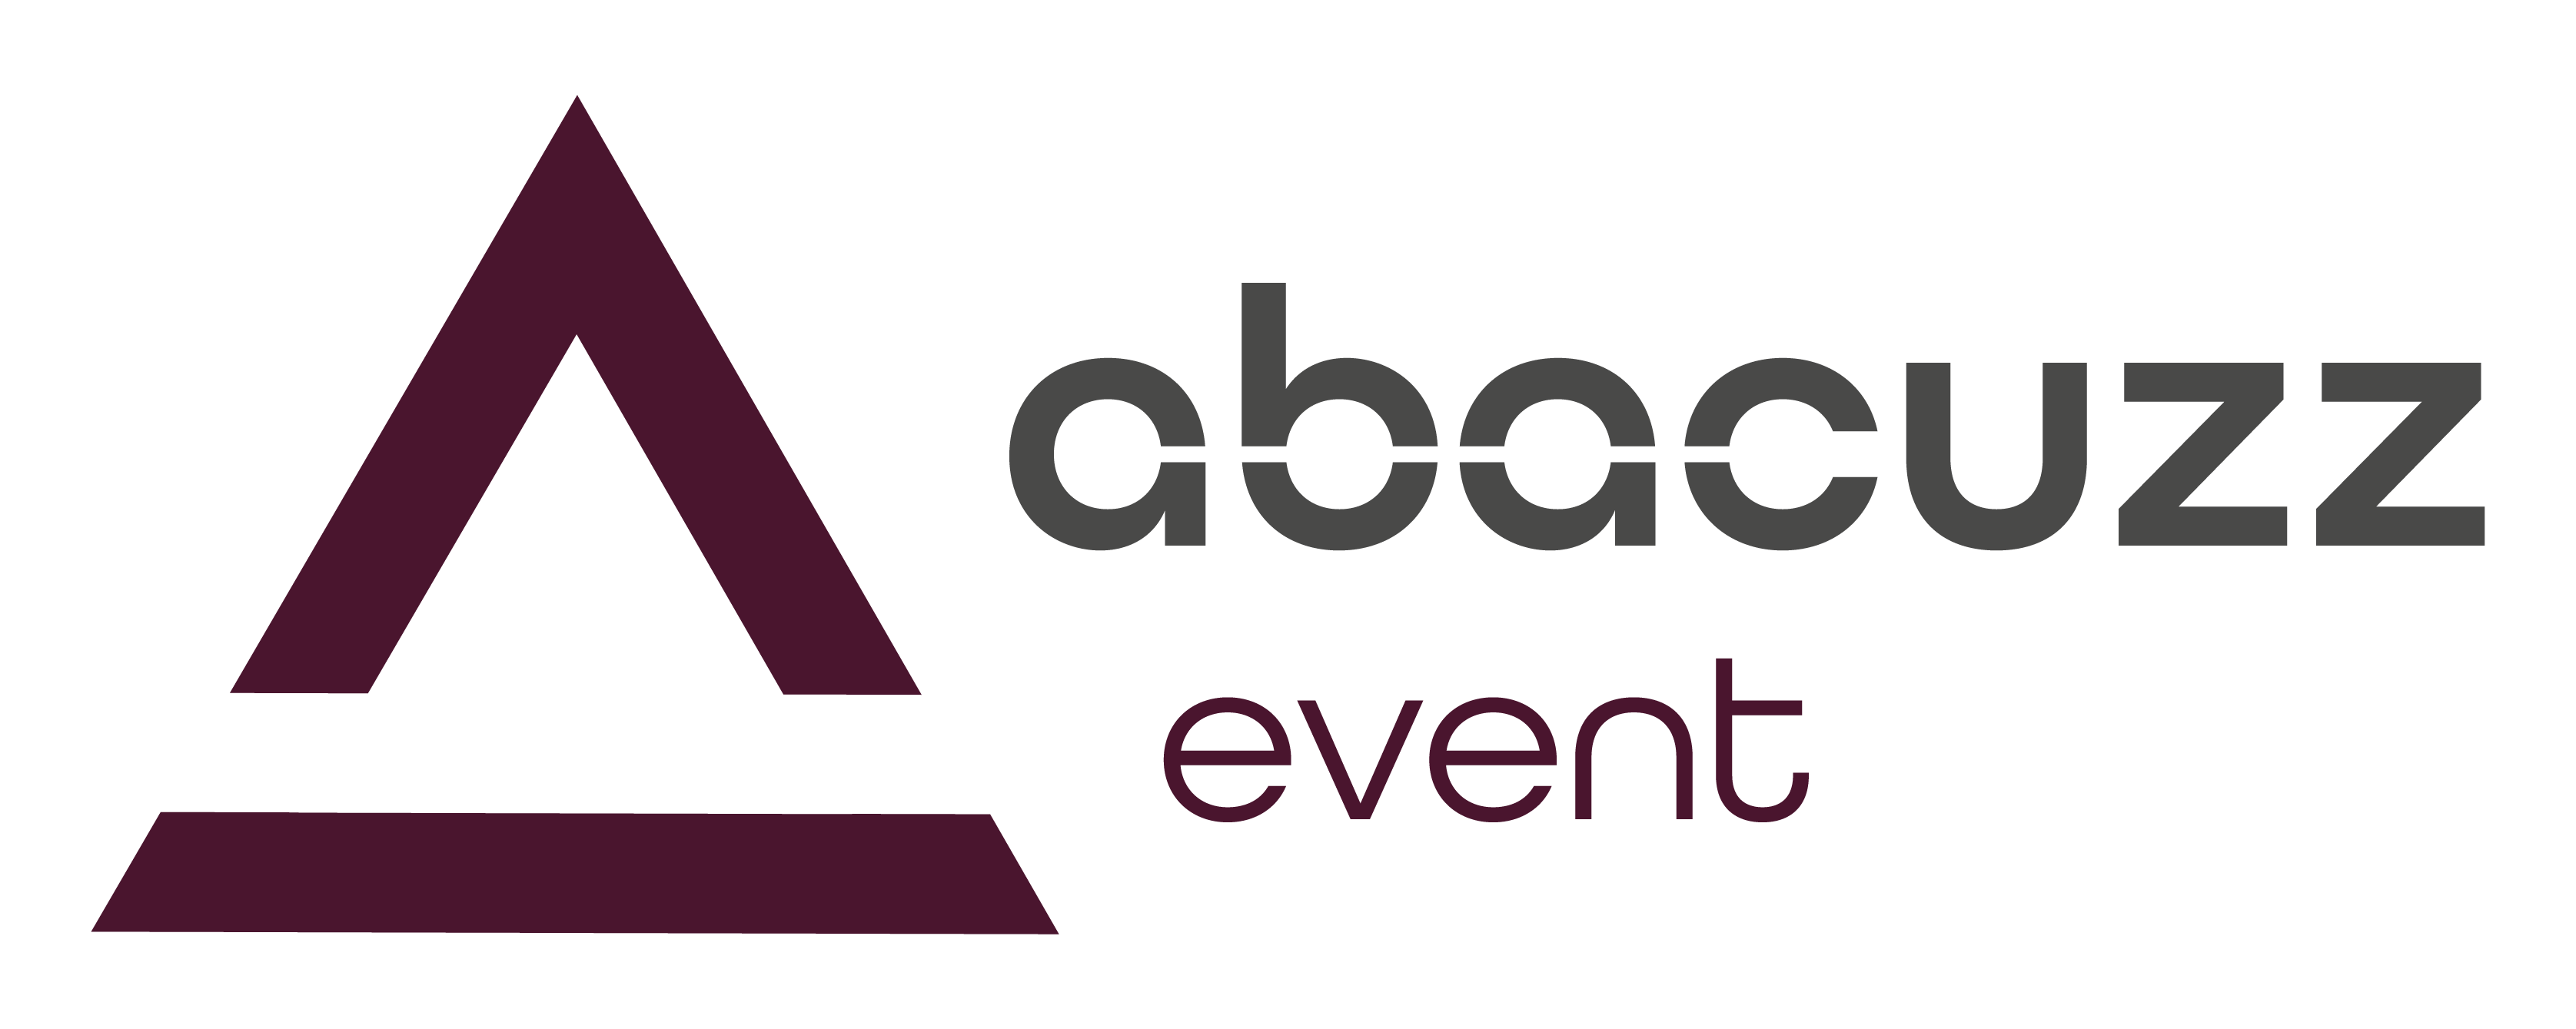 Abacuzz EVENT